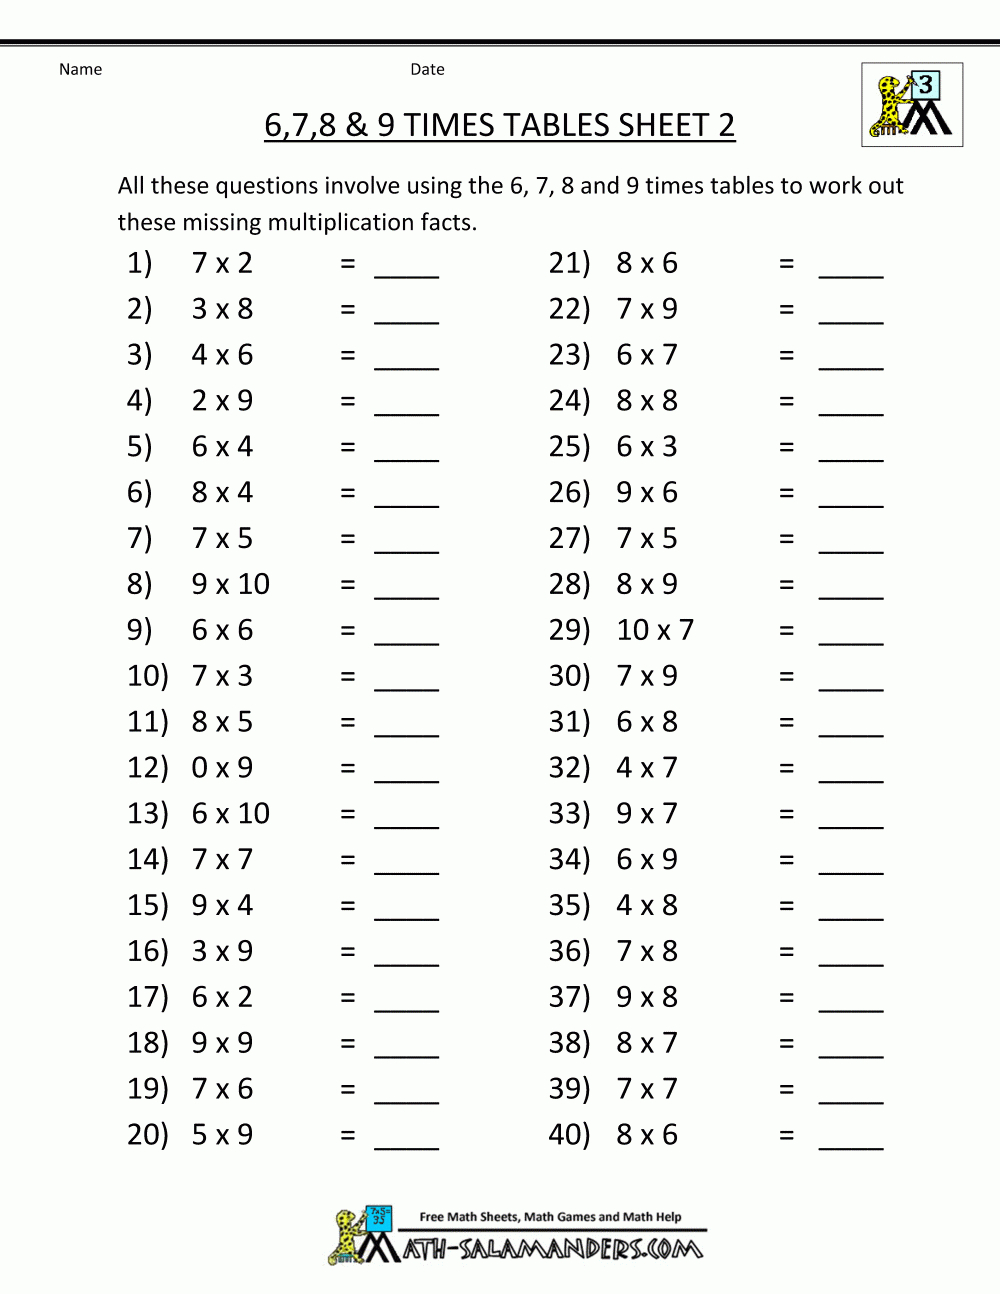 Free Math Sheets Multiplication 6 7 8 9 Times Tables 2 with regard to Printable Multiplication Worksheets 6